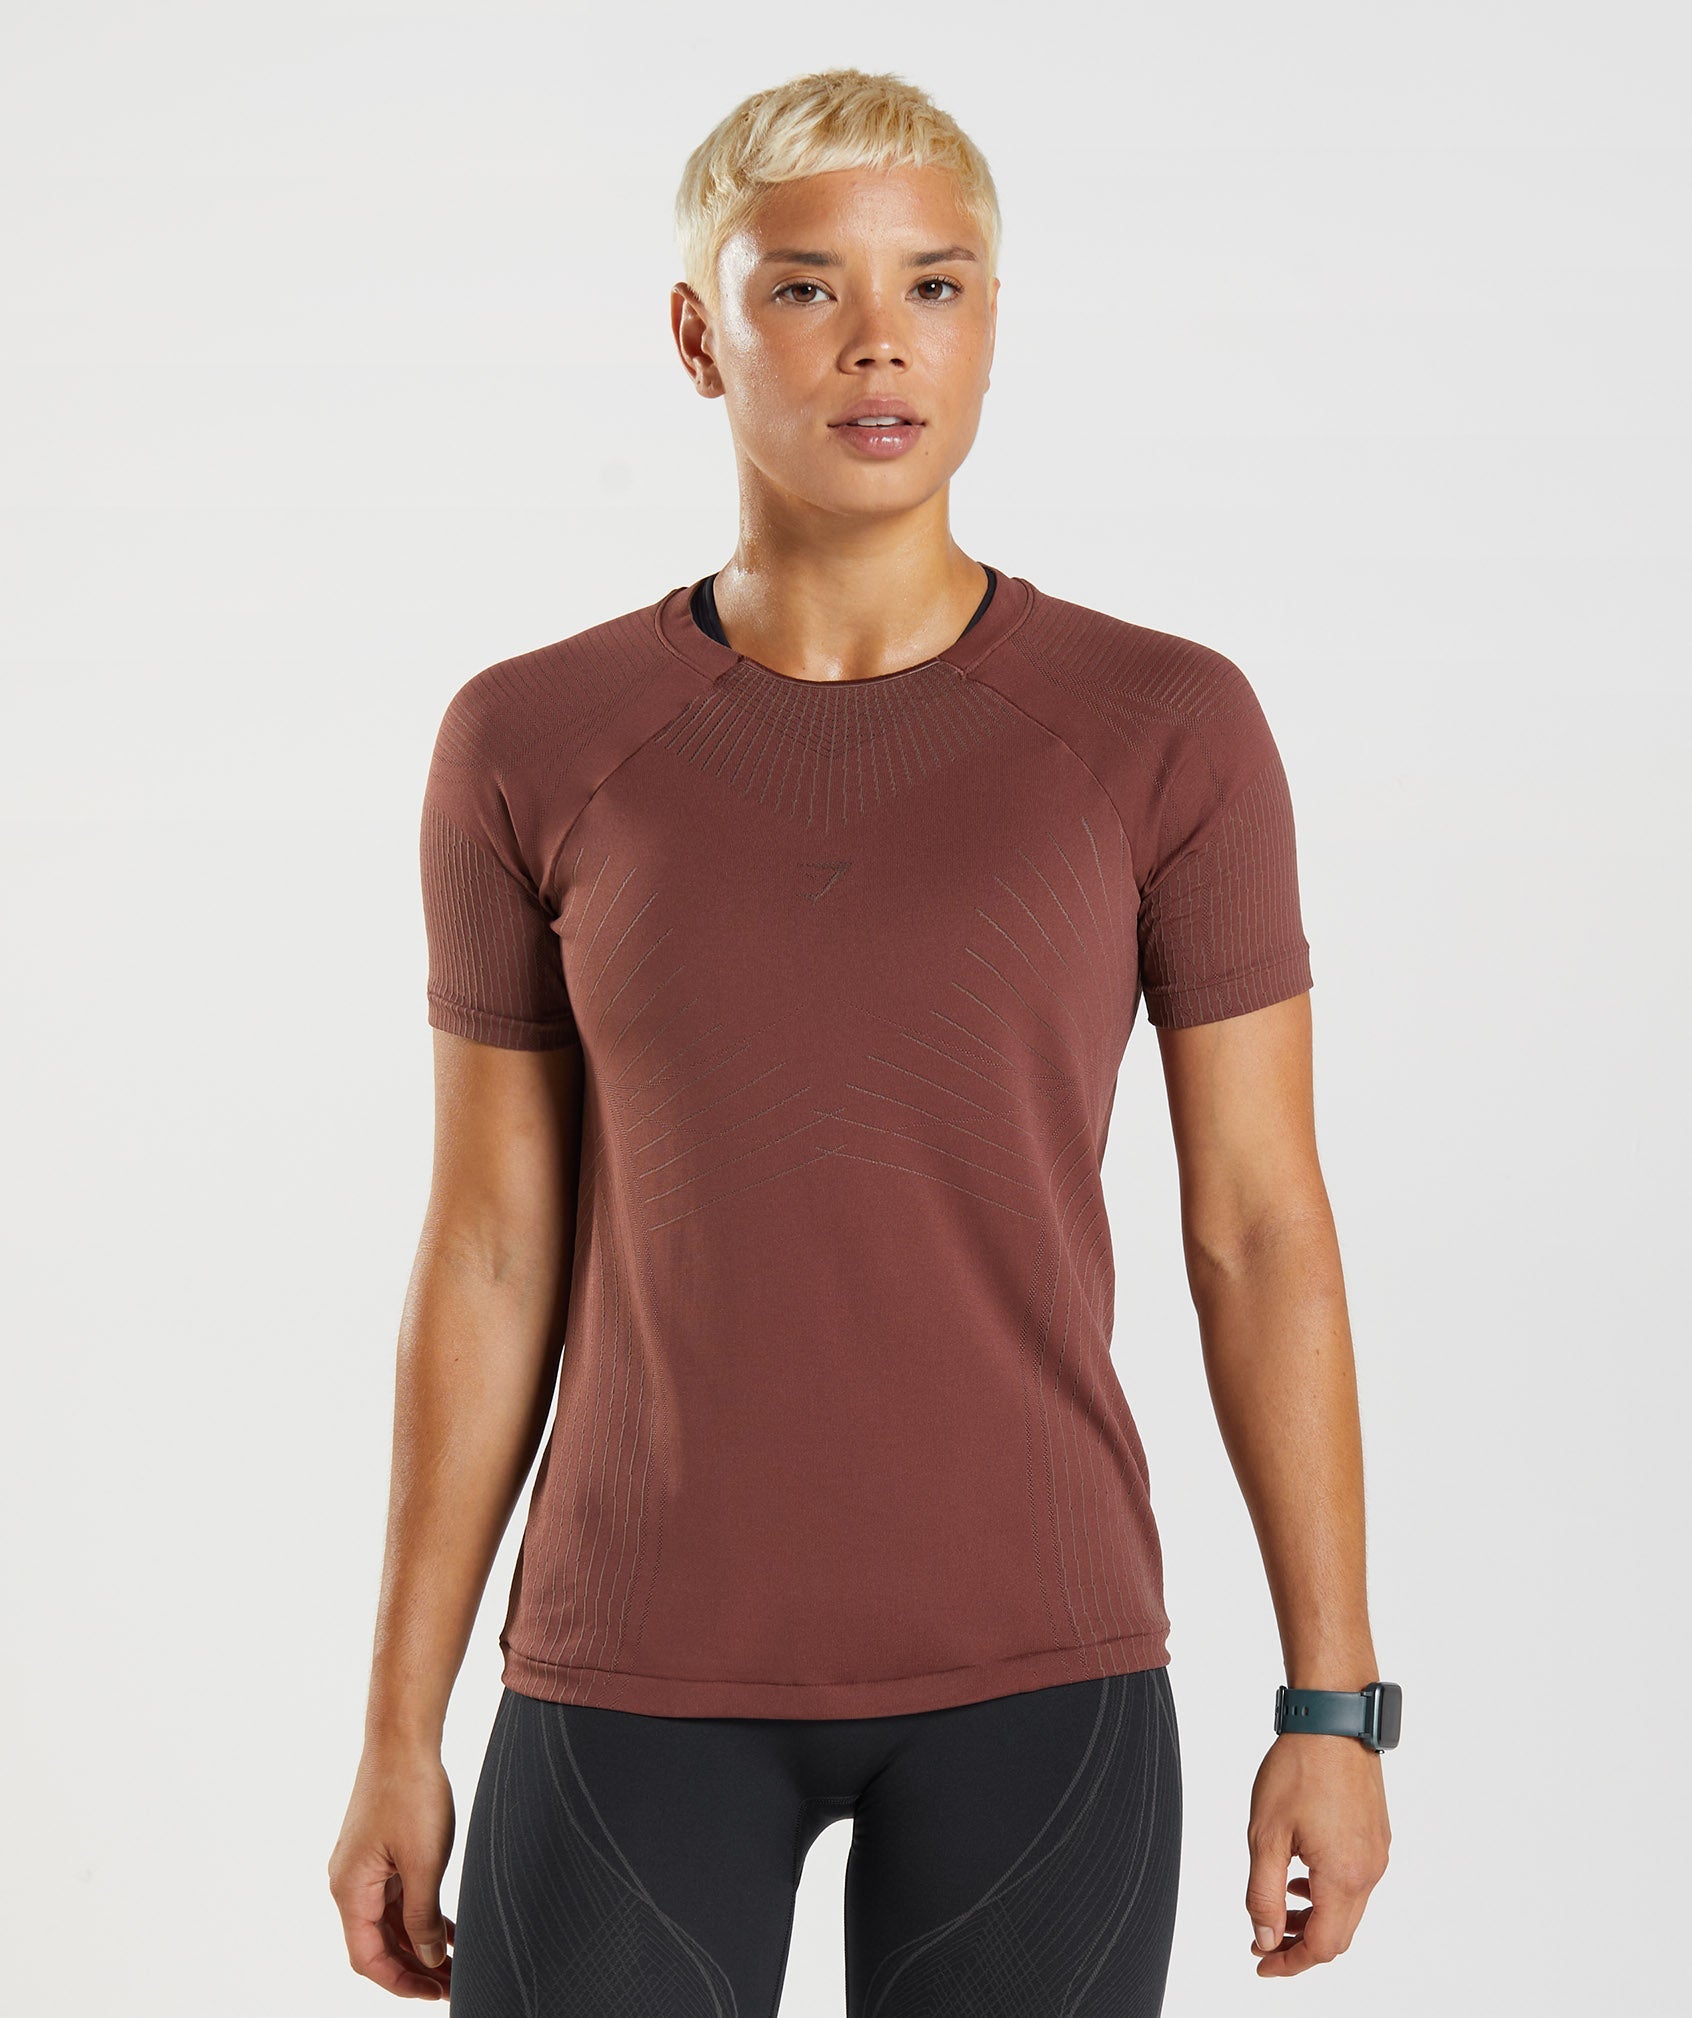 Apex Seamless Top in Cherry Brown/Truffle Brown - view 1